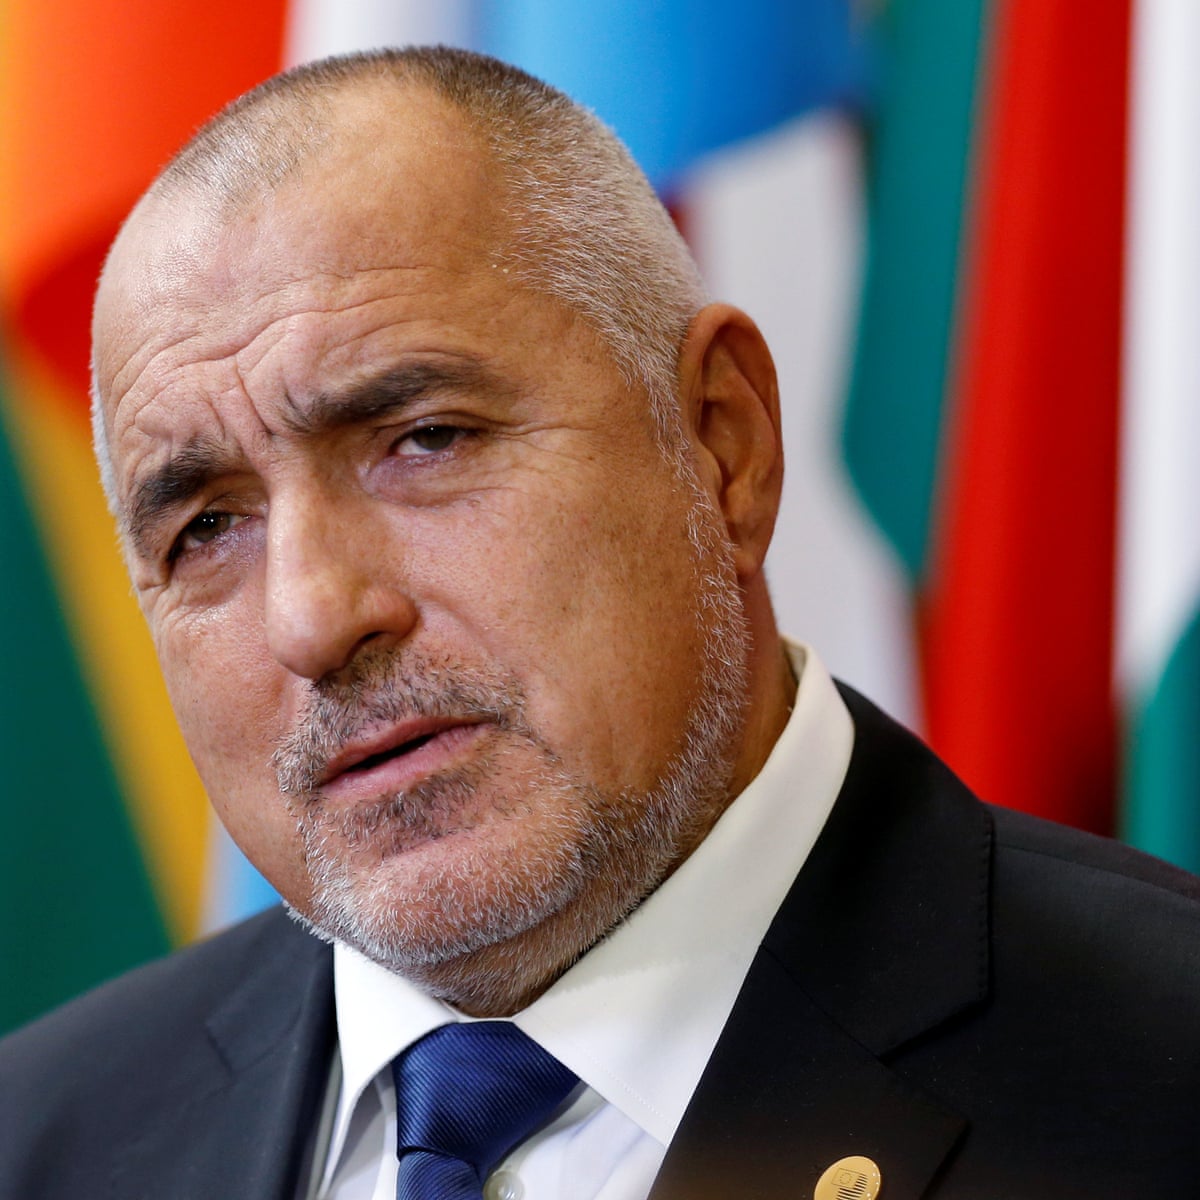 Boyko Borissov Summoned To Police For Questioning Over “Cannibal Case”